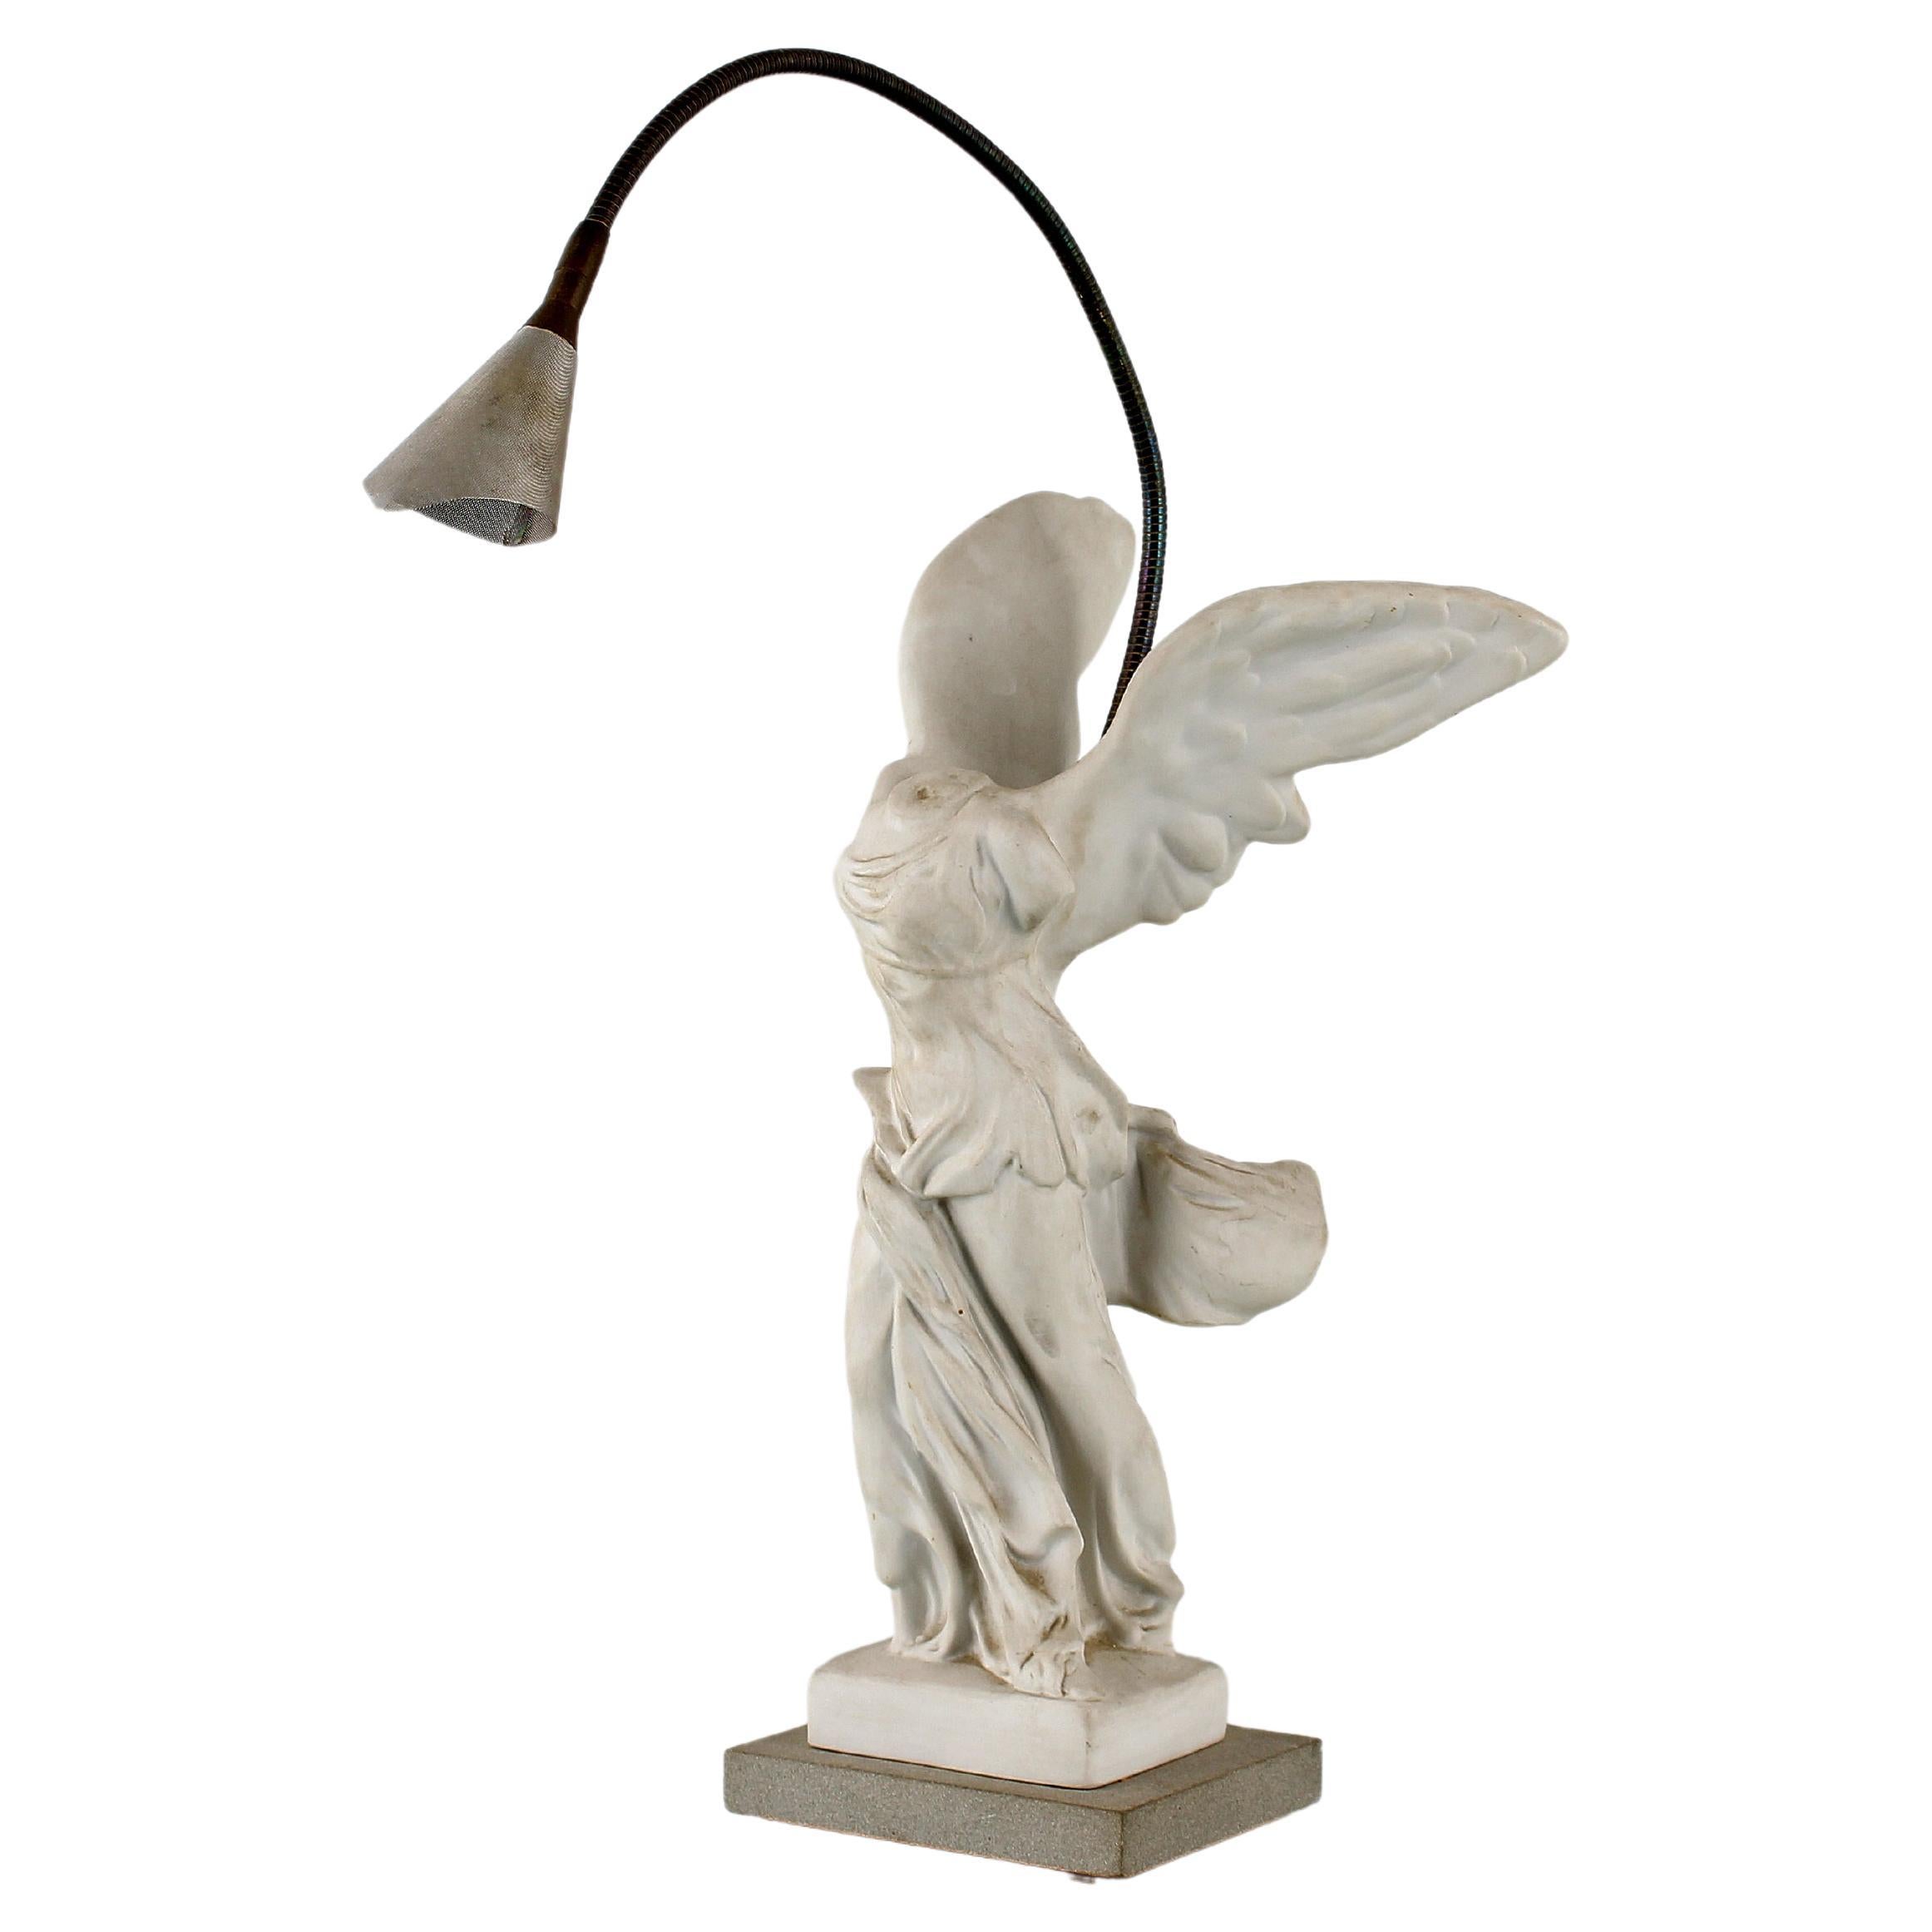 Sculptural table lamp depicting the 